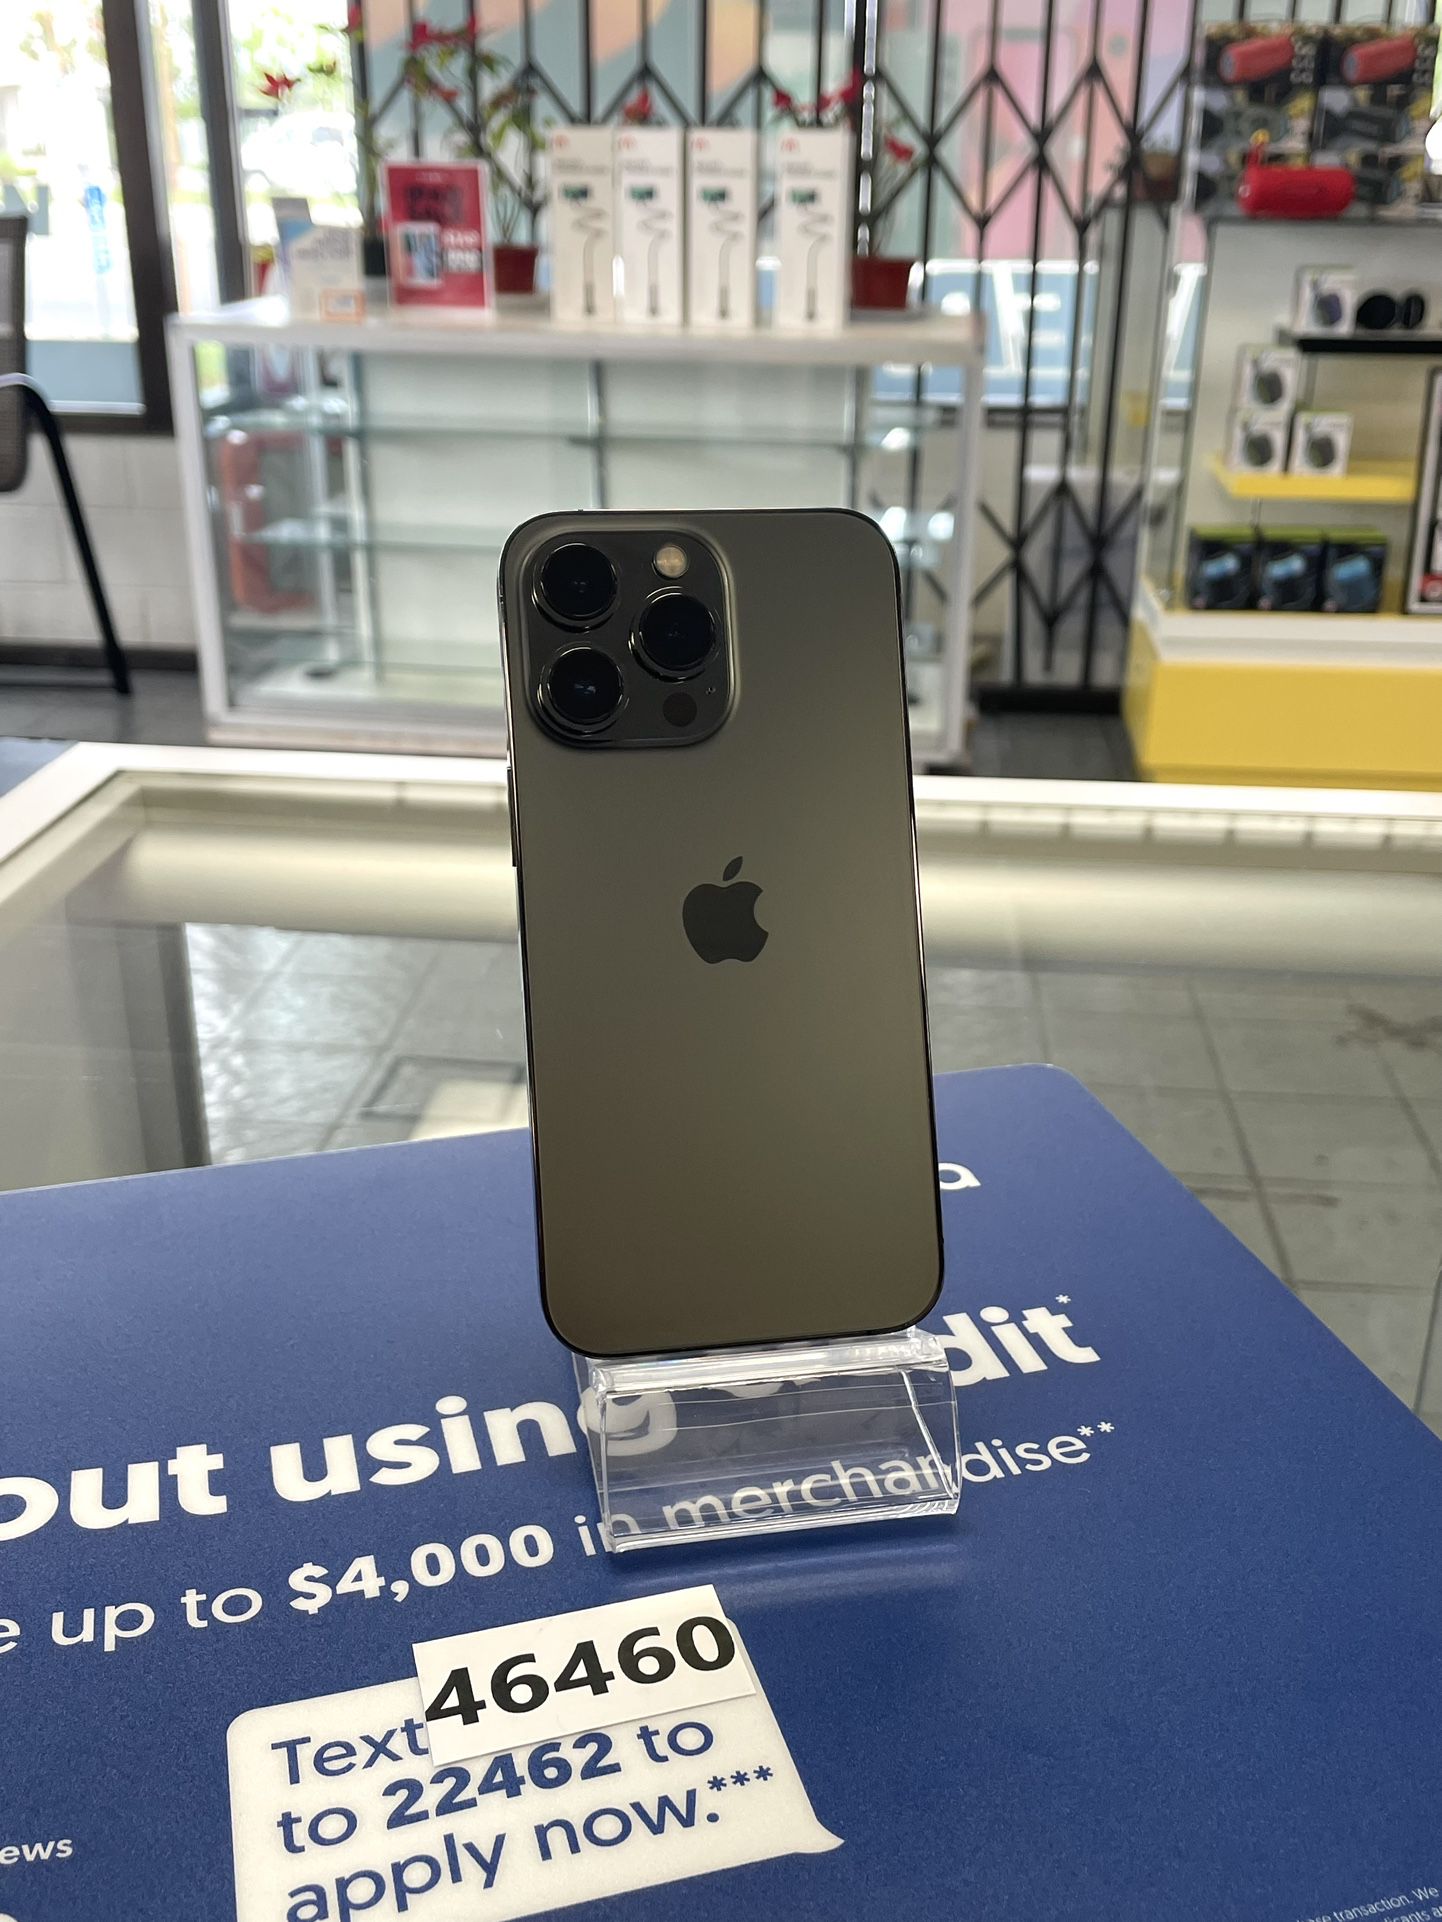 IPHONE 13 PRO 256GB UNLOCKED $54 Down Payment 